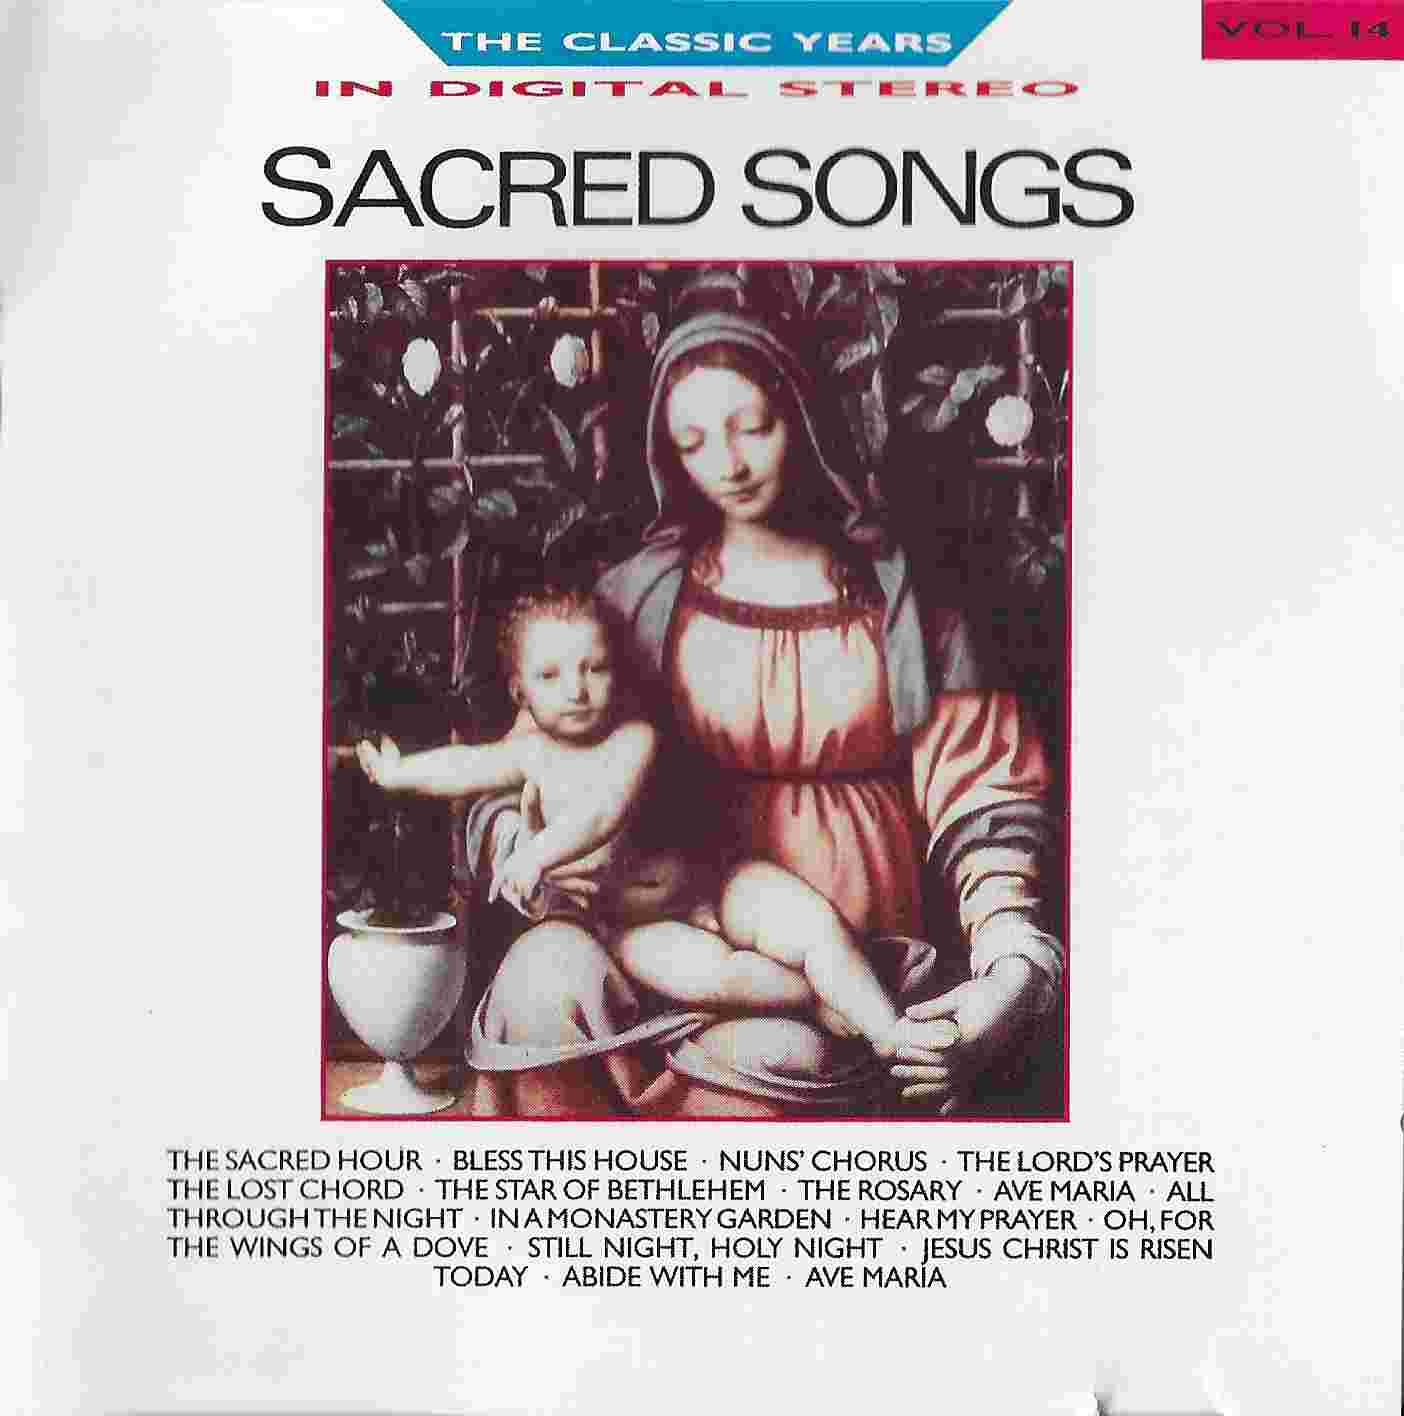 Picture of BBCCD689 Songs for a sacred season by artist Unknown from the BBC cds - Records and Tapes library